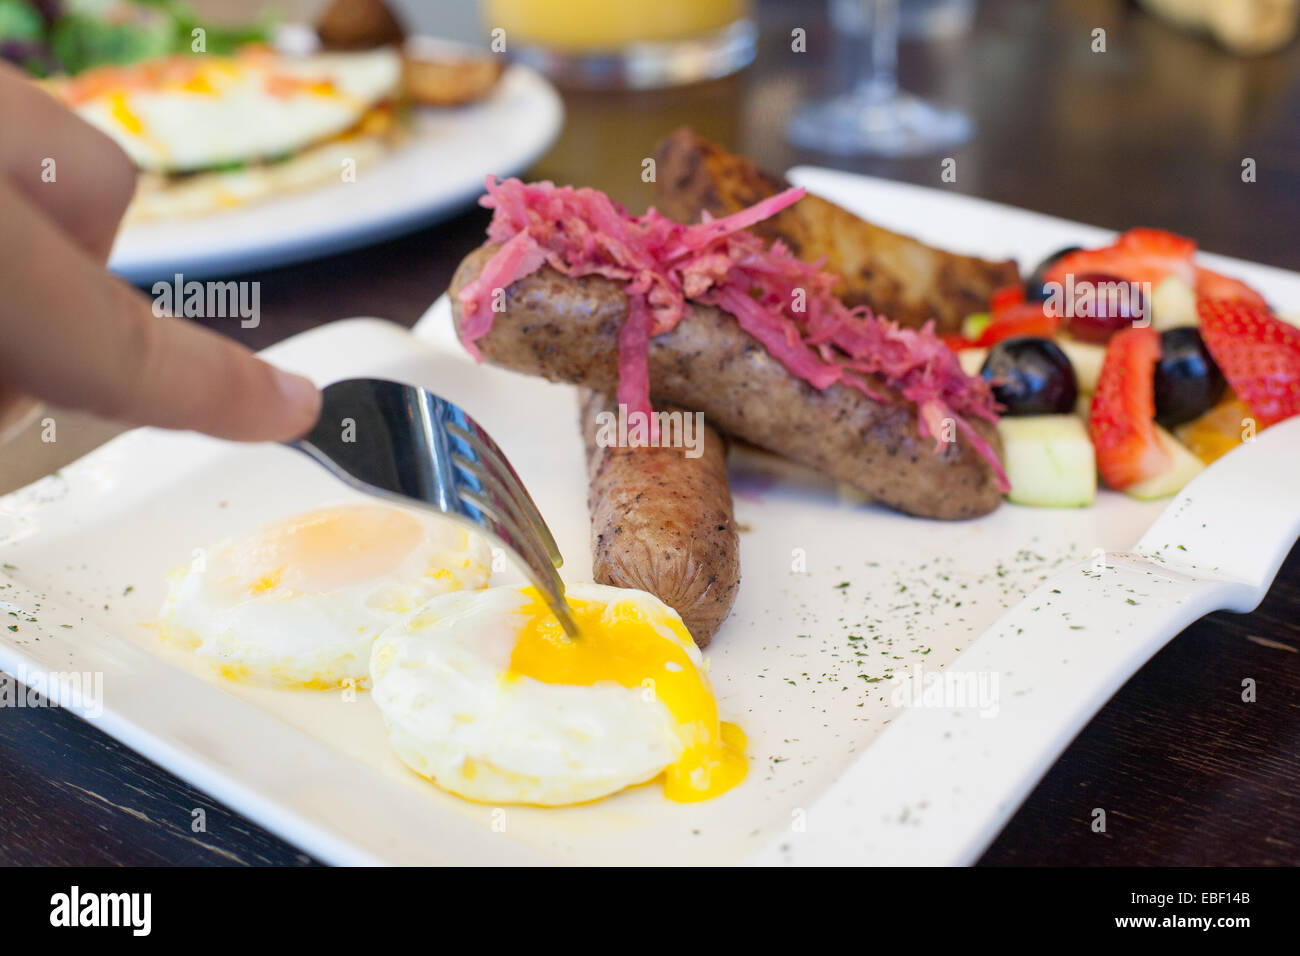 Hand with fork breaking out an egg yoke Stock Photo